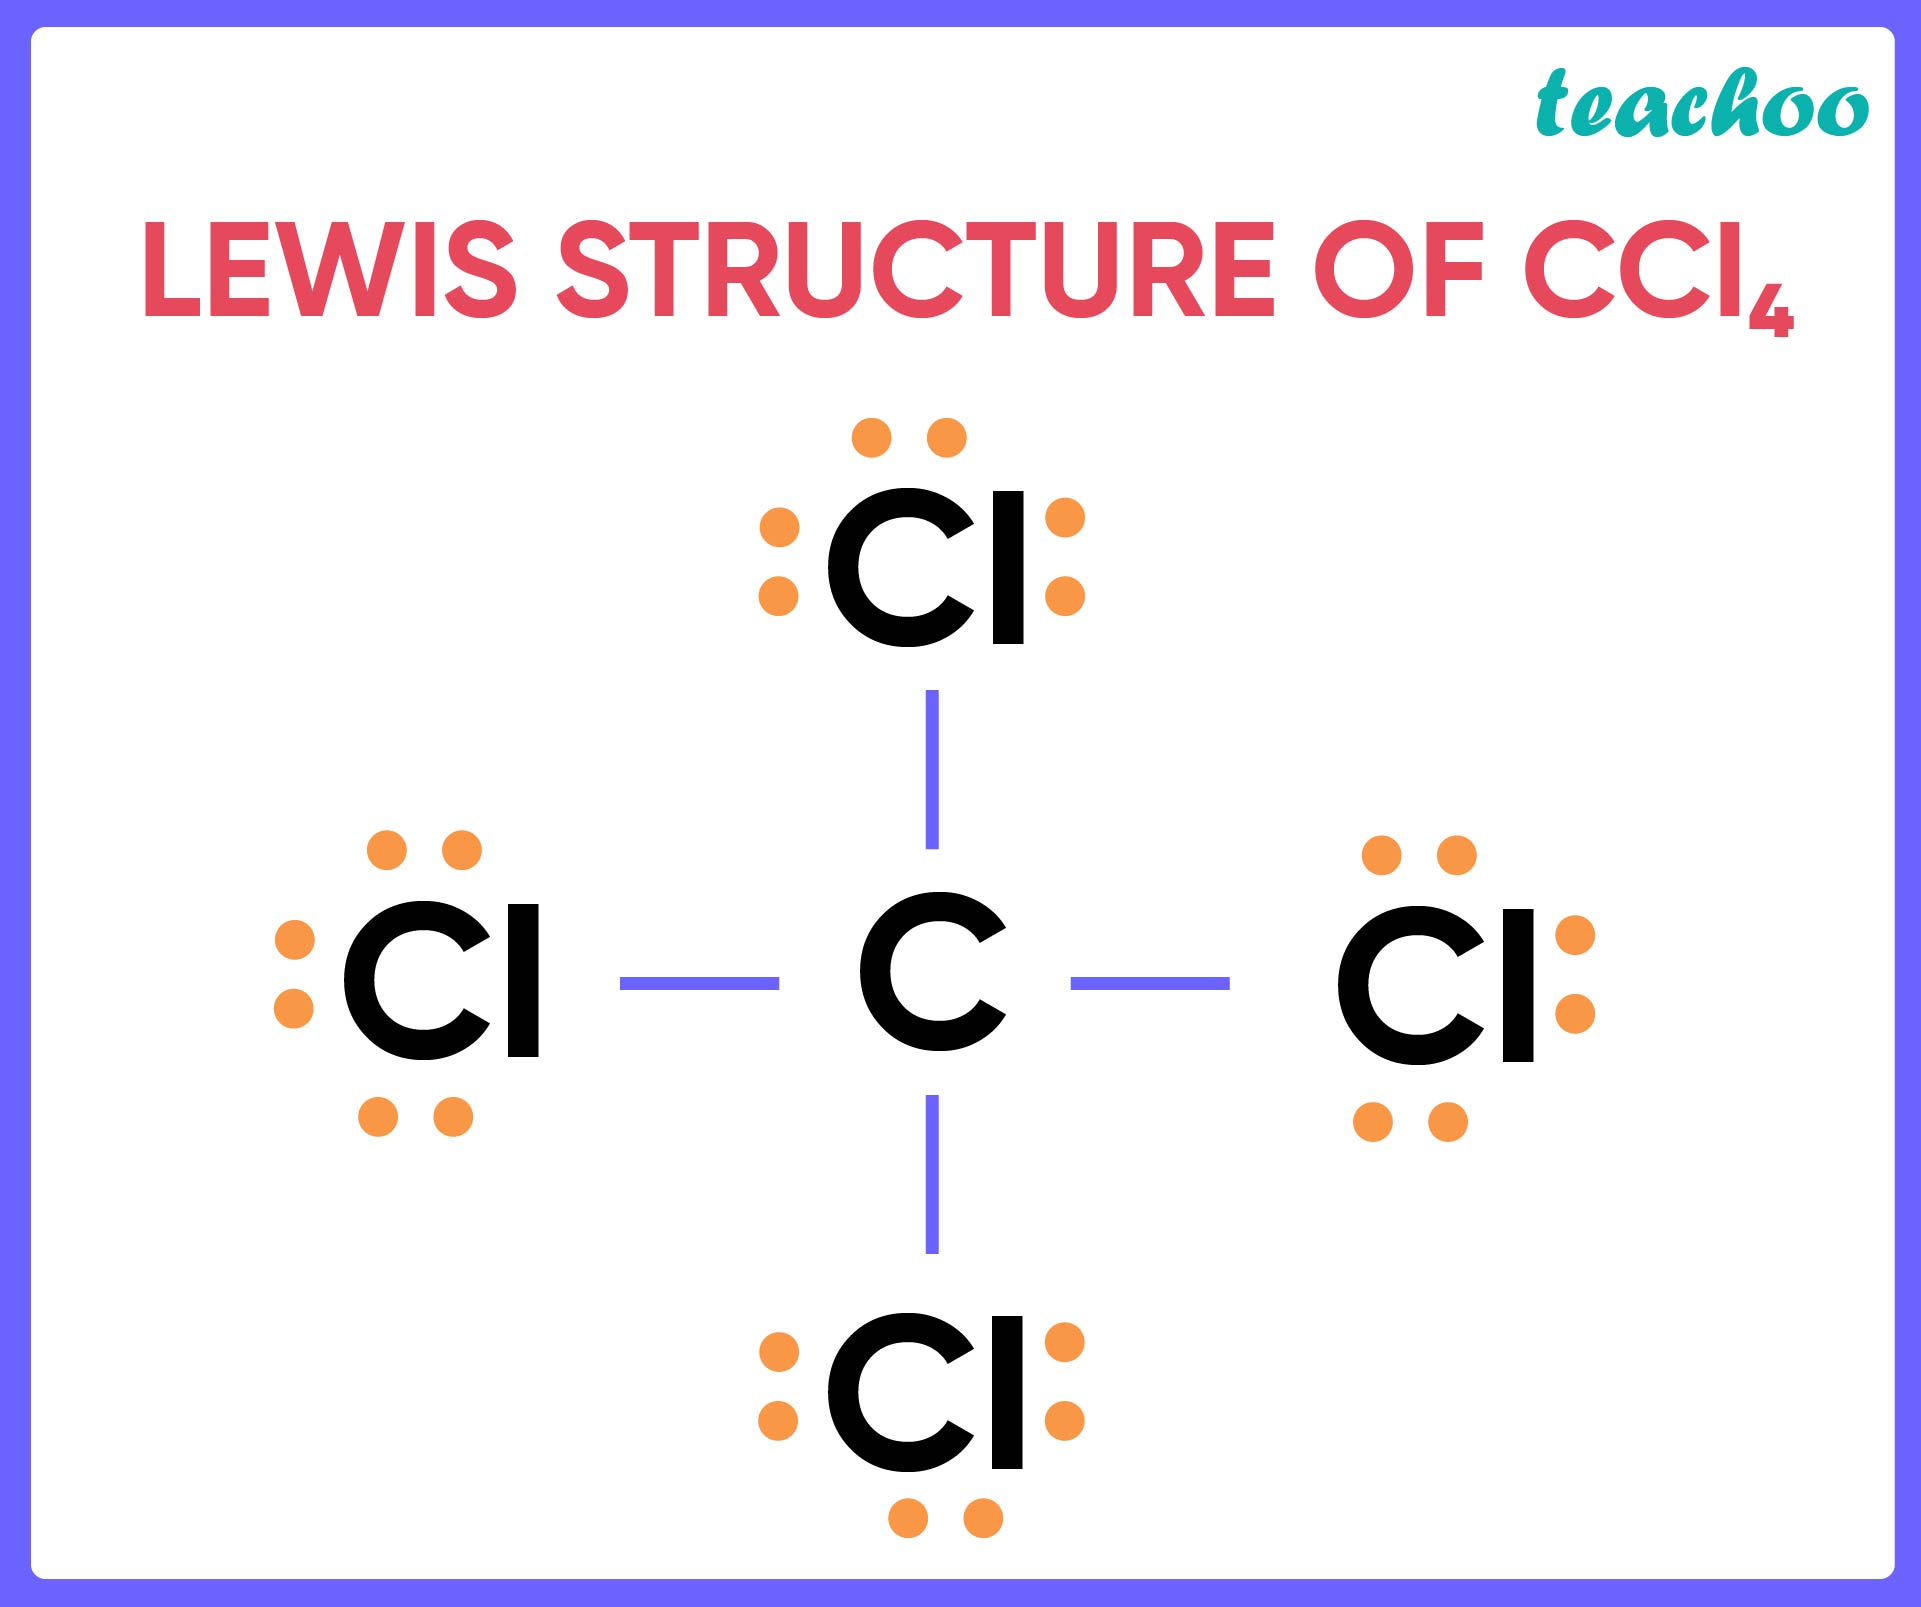 Lewis Structure of CCl4-01.jpg